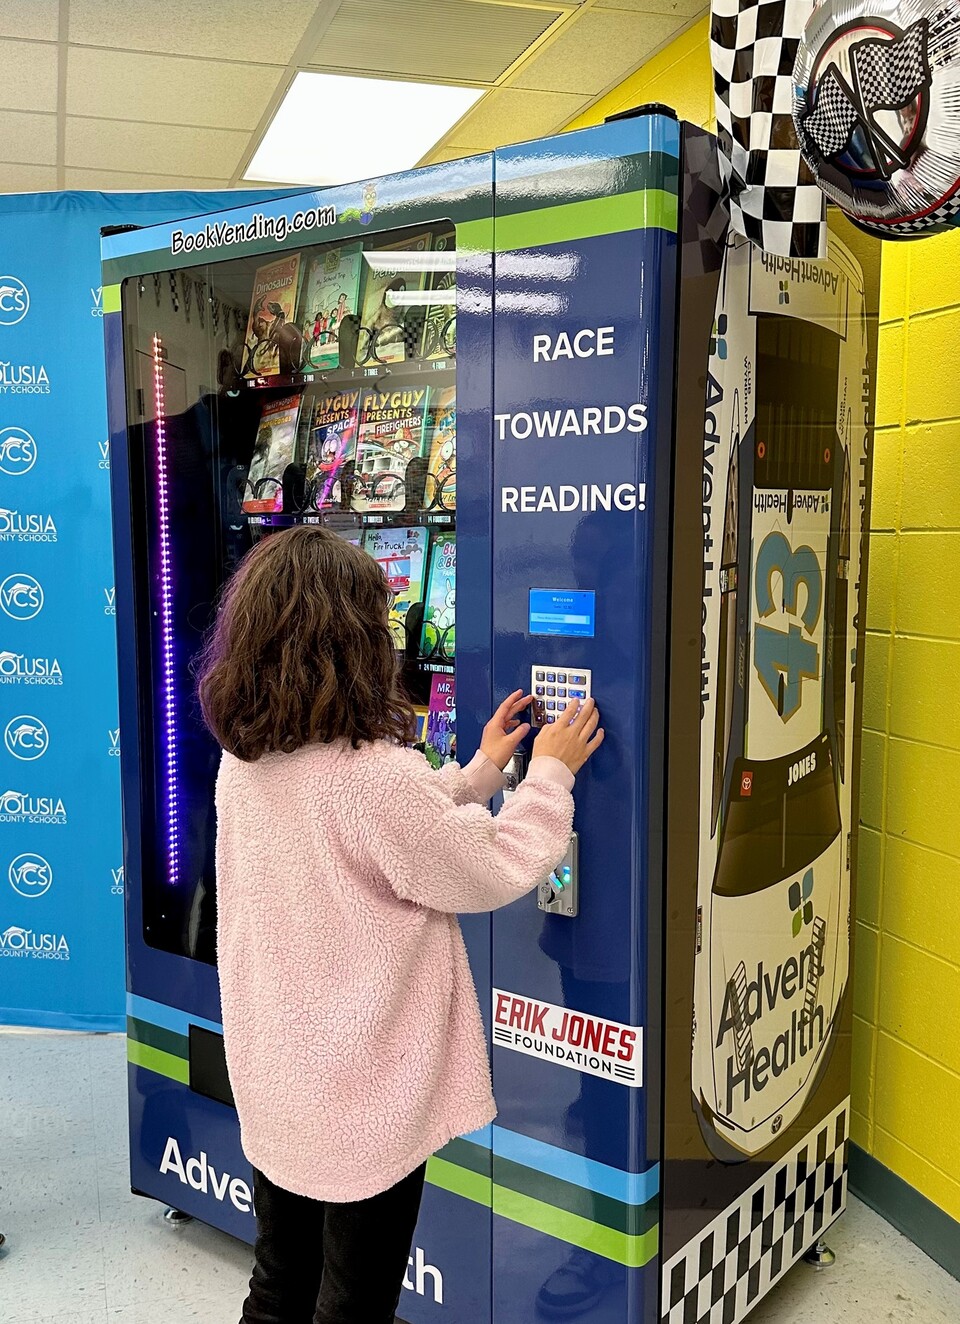 NASCAR Driver Reads to Children and Delivers a "Bookworm" Vending Machine to Volusia Elementary School